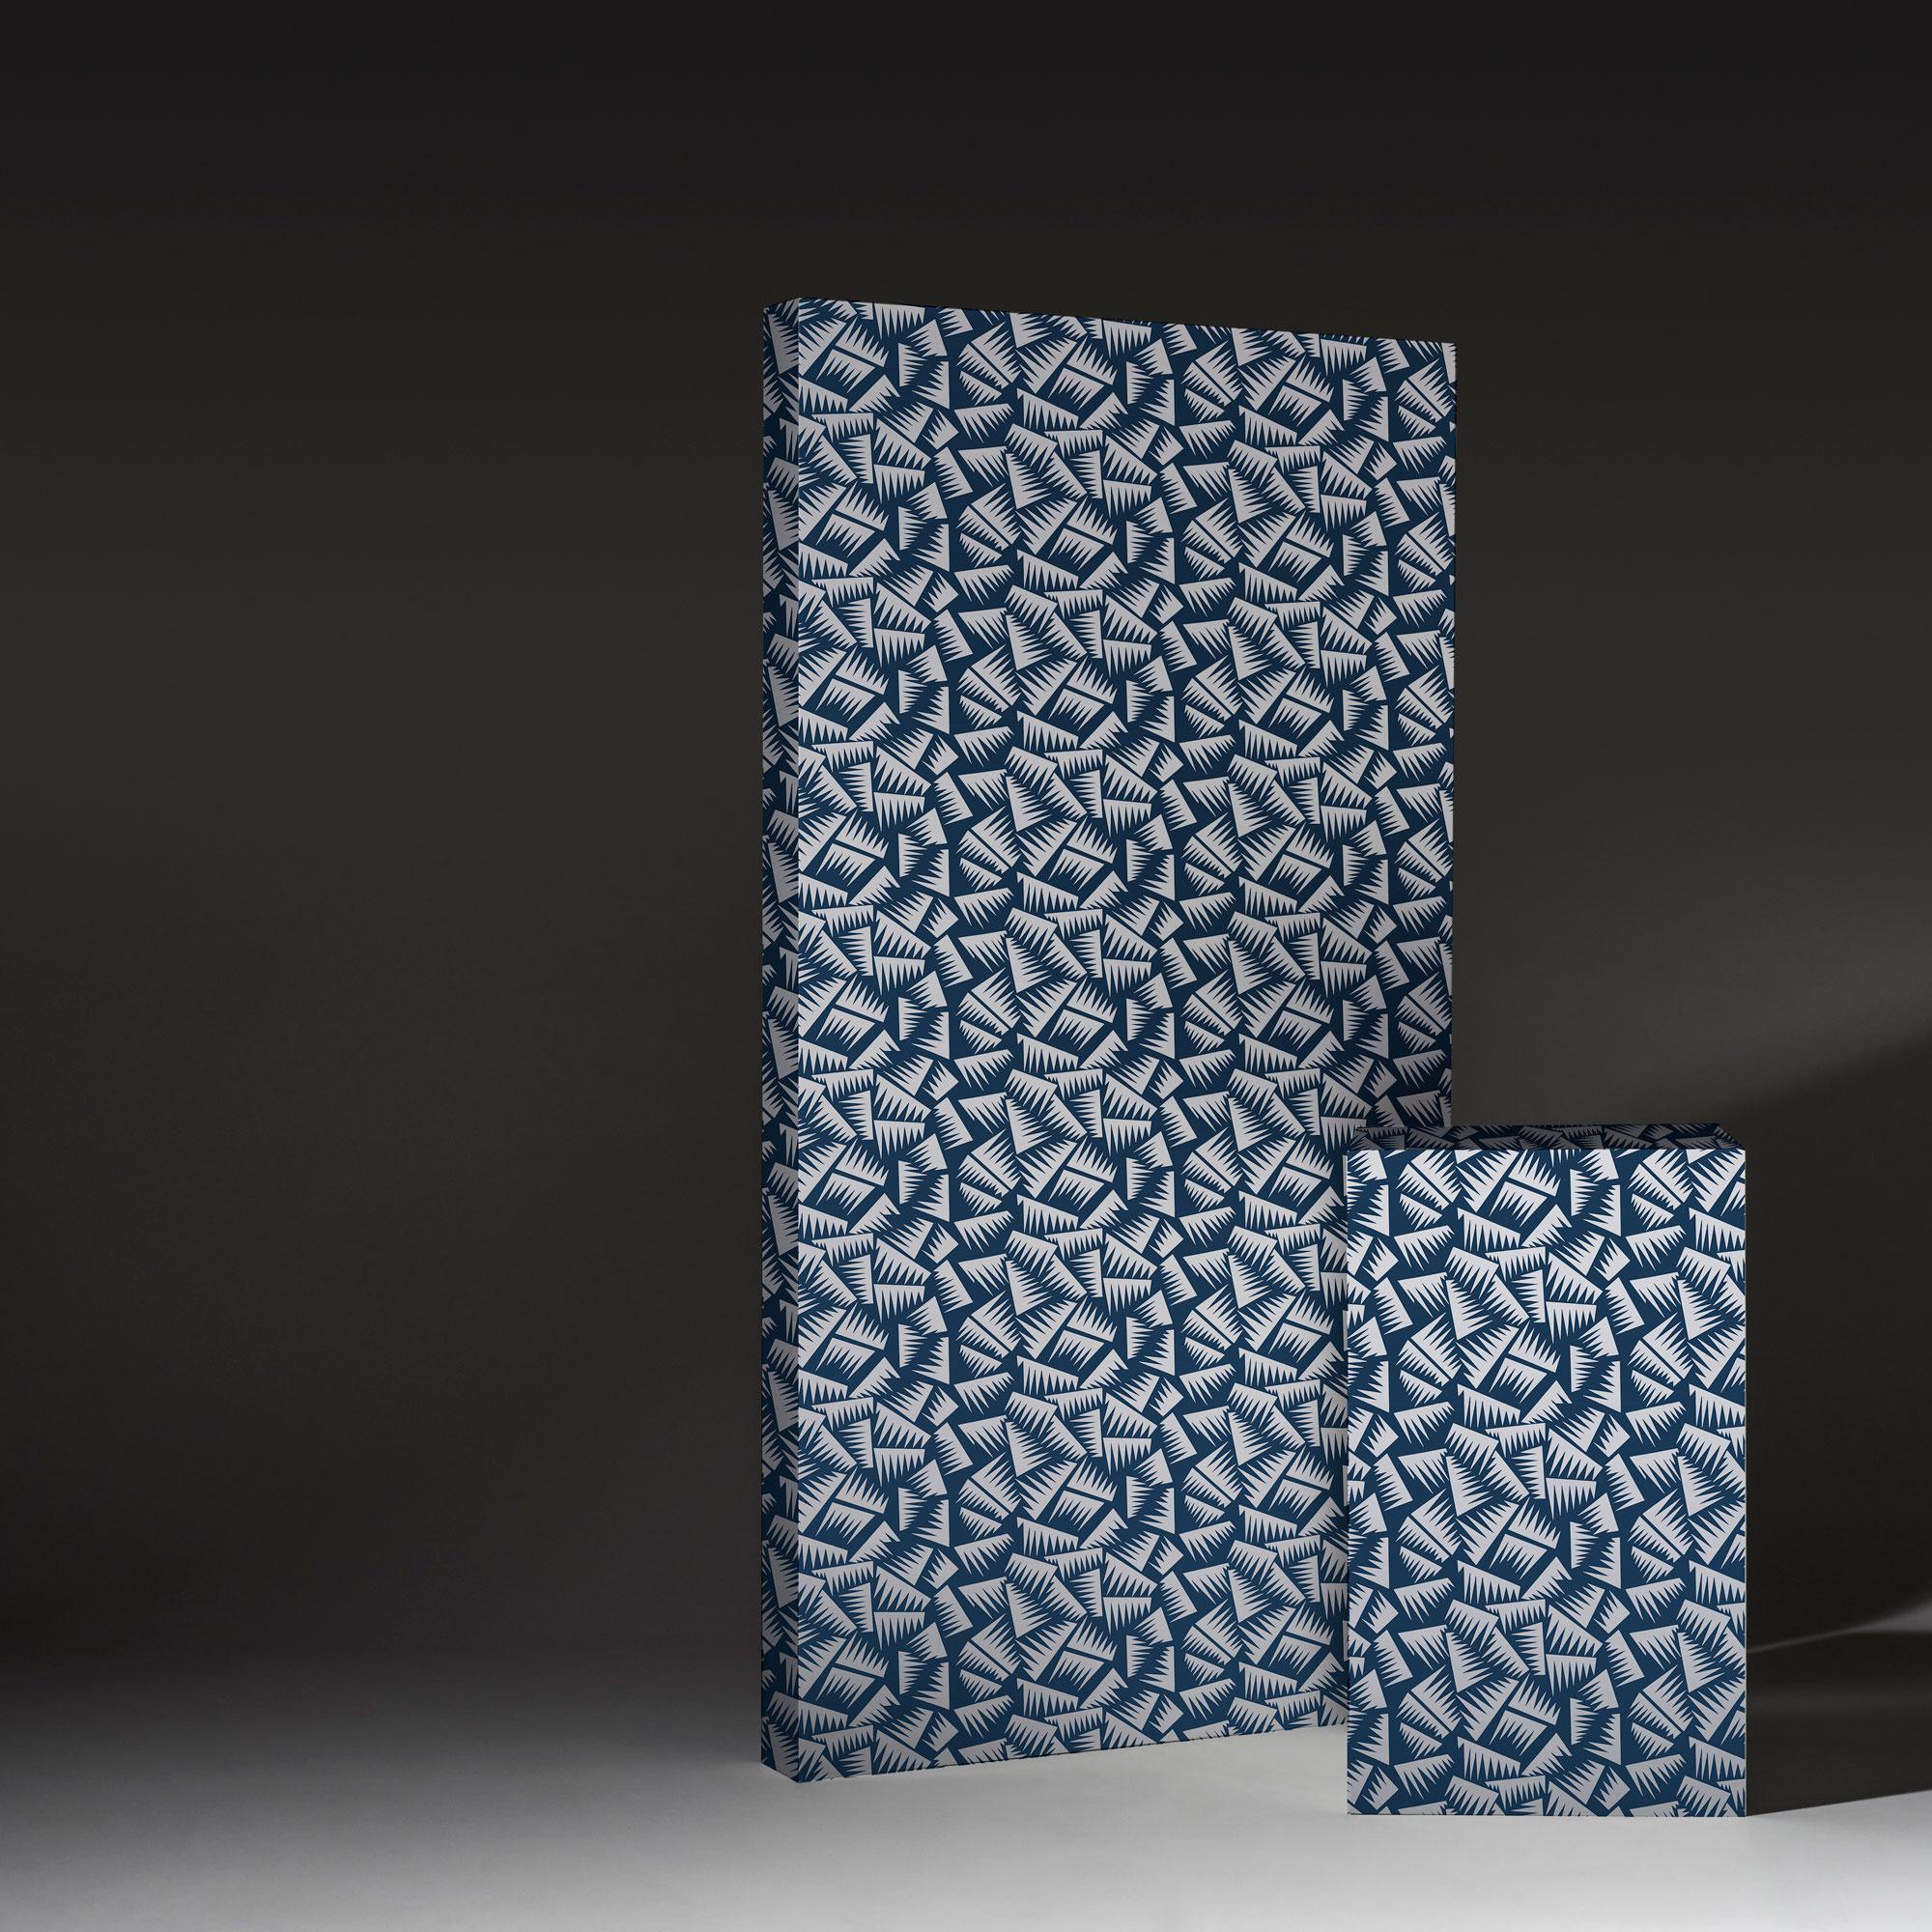 JER is a wallpaper. The pattern was designed during the roaring twenties by Art Déco superstar Jacques Emile Ruhlmann.
La Chance re edited this elegant and ultra-modern pattern and developed it in contemporary colors as well as in a classic
black